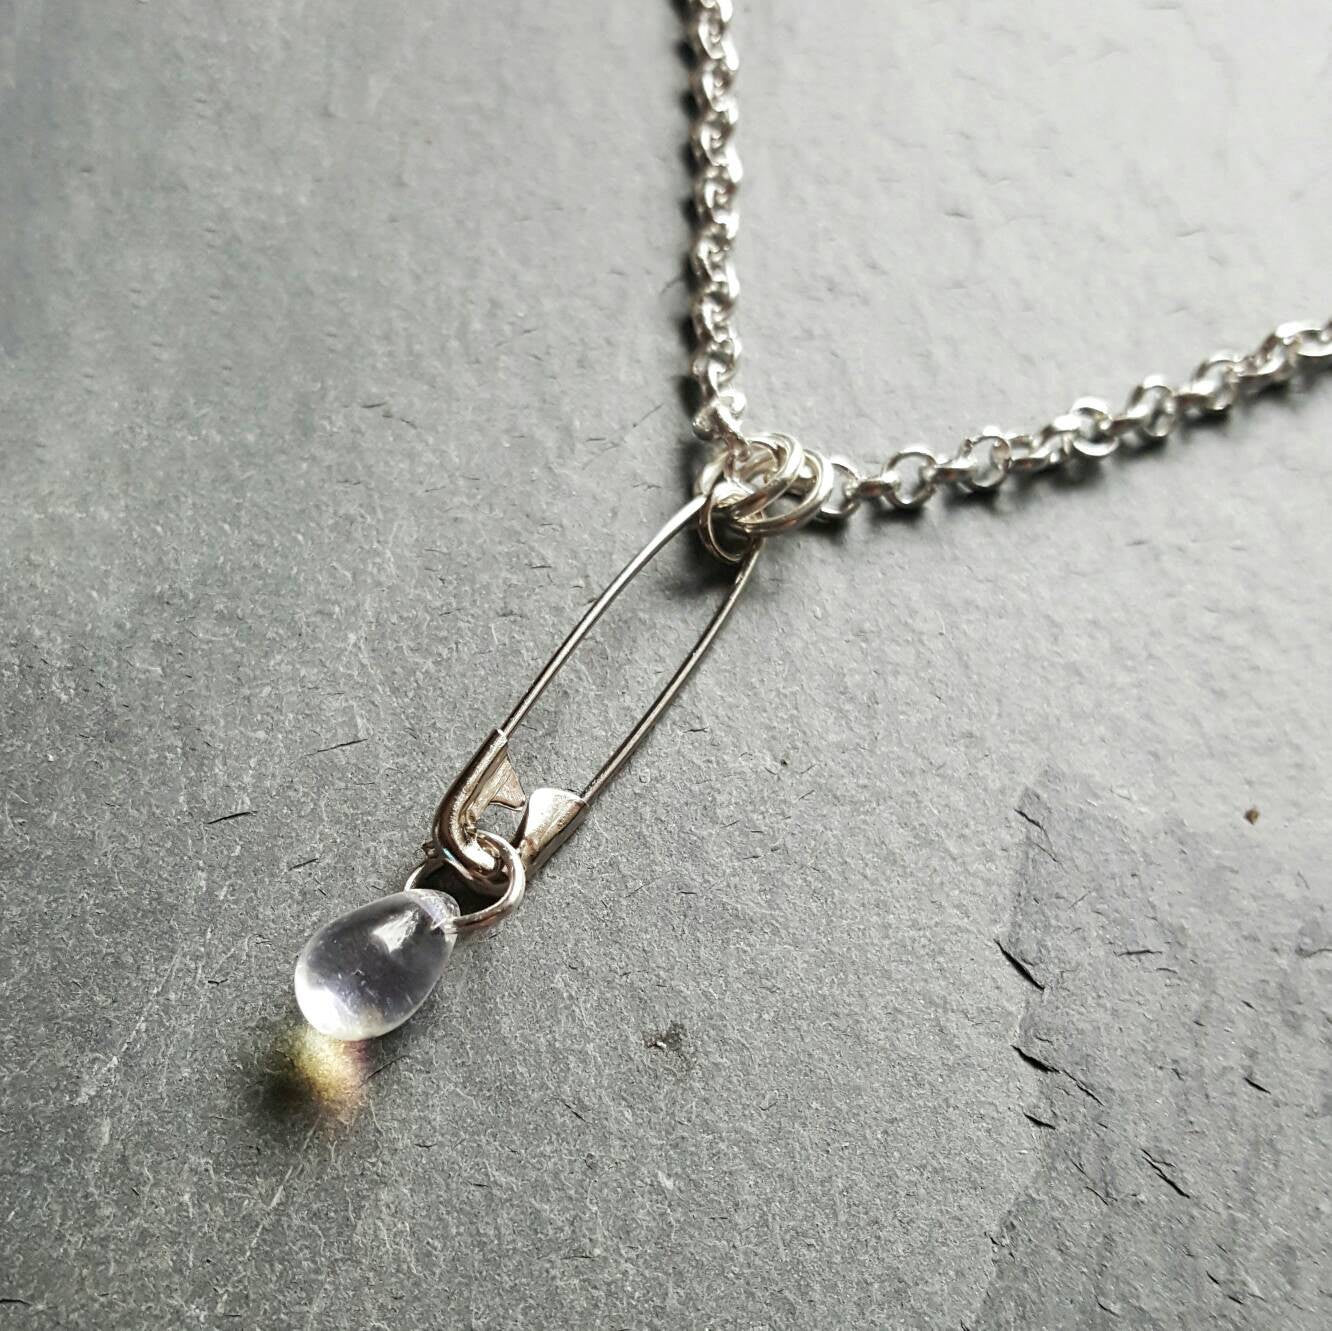 Safety Pin Teardrop Necklace Safety Pin Jewelry You Are Safe With Me Movement - DRAVYNMOOR